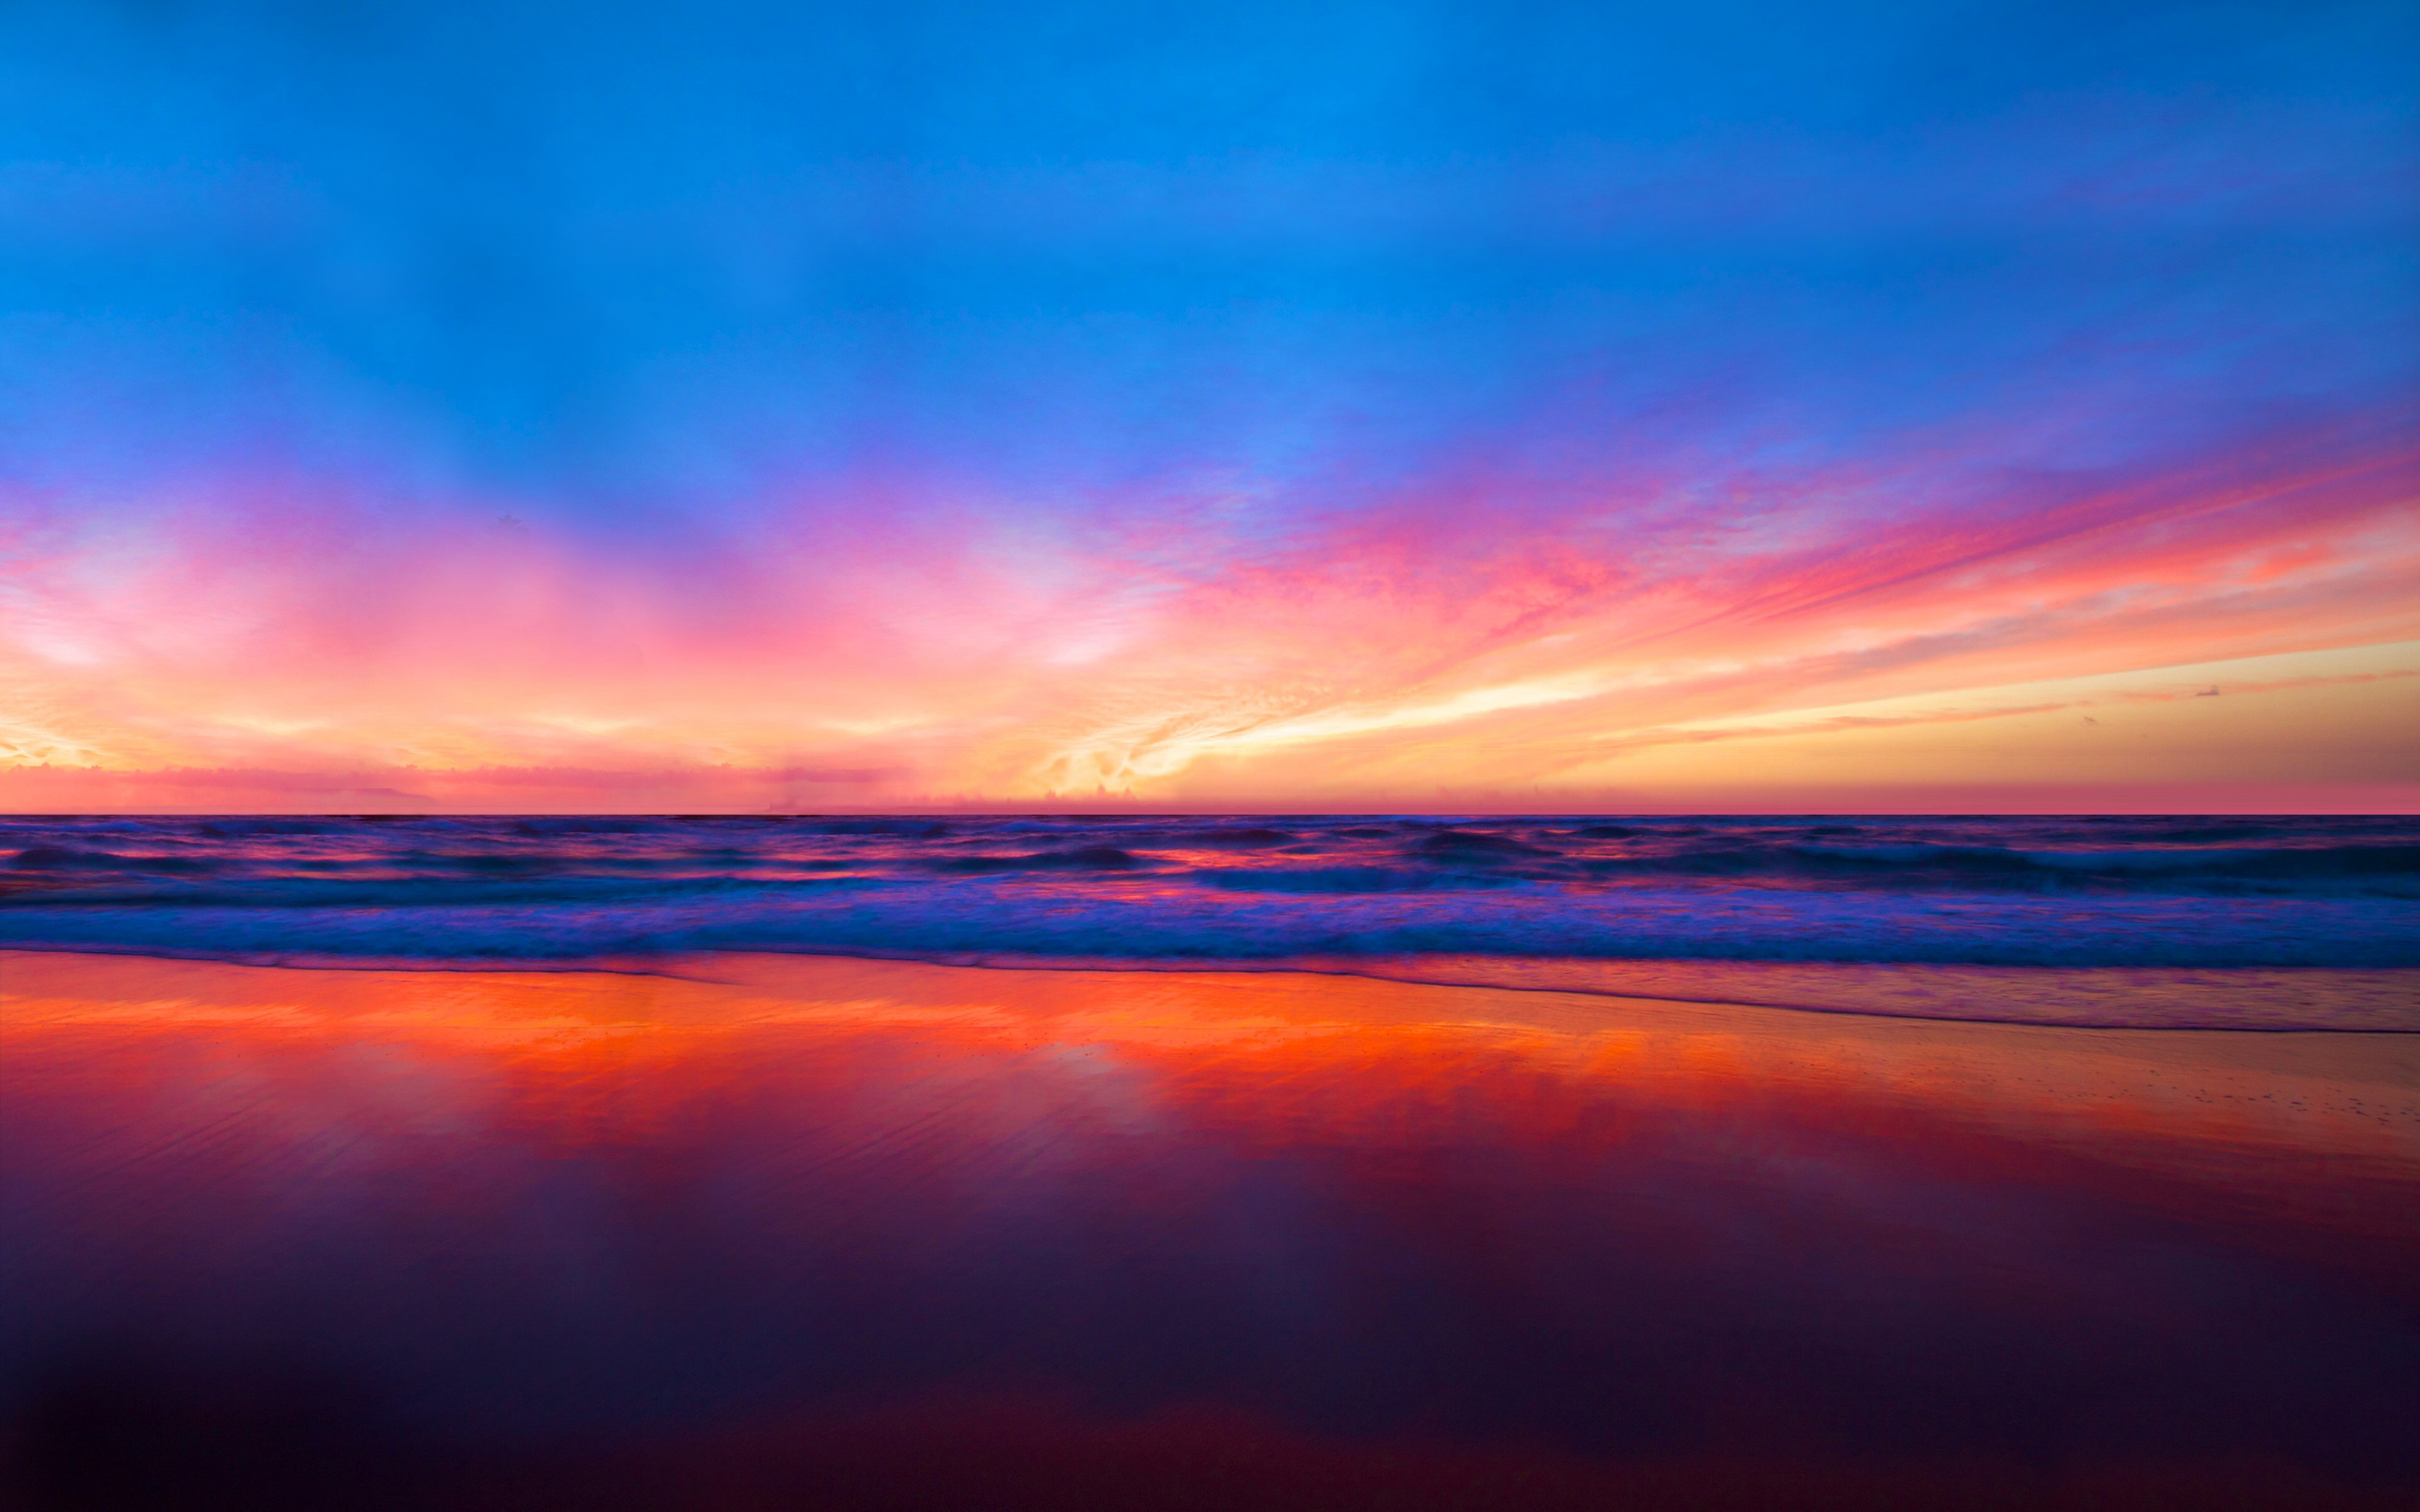 colorful, horizon, beach, sunset, earth, scenic cell phone wallpapers